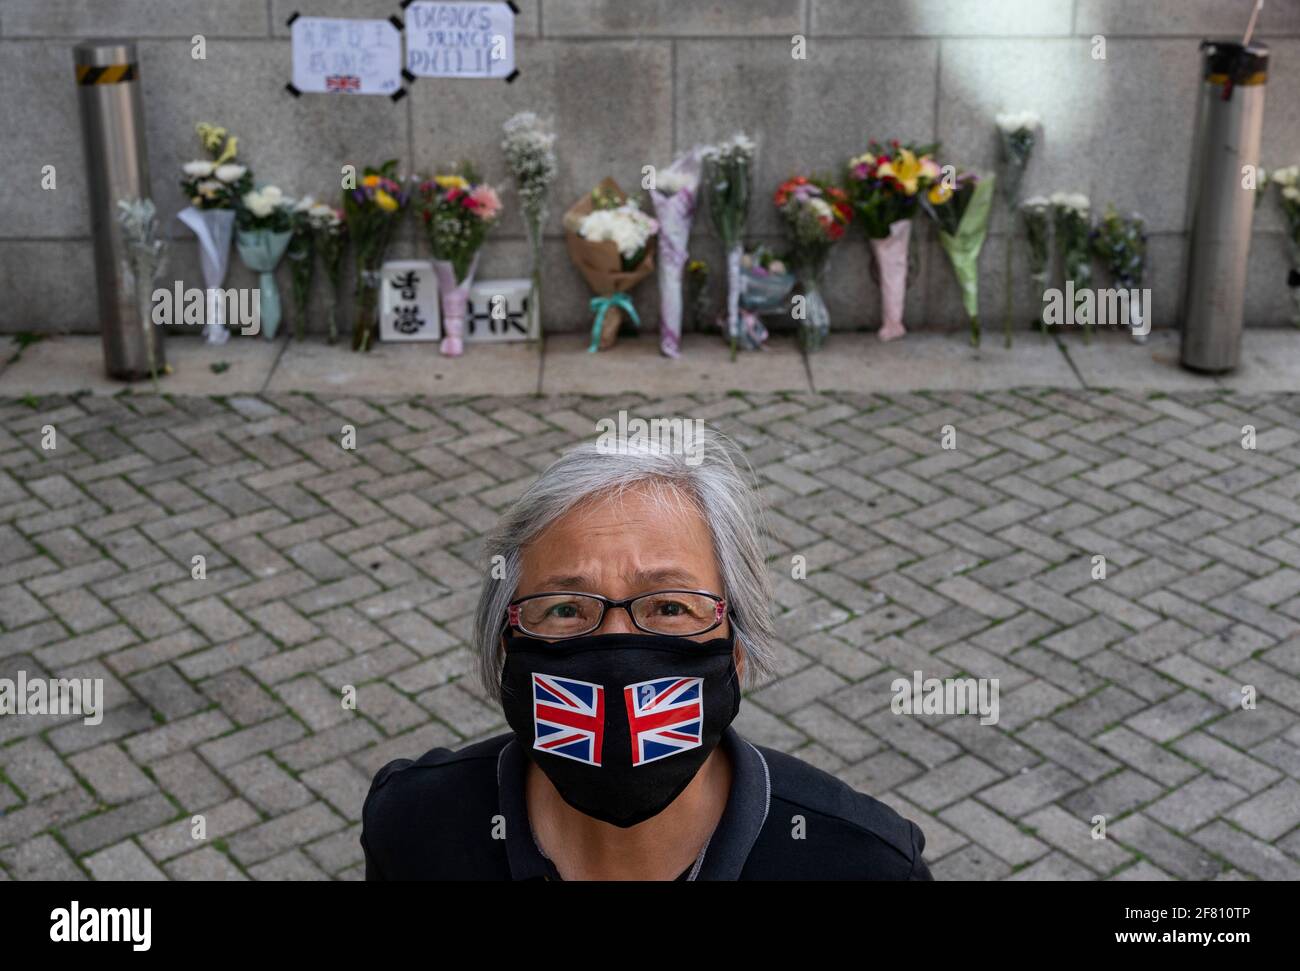 A woman wearing the United Kingdom theme face mask seen outside the embassy British Consulate General Hong Kong after the announcement regarding the death of Britain's Prince Philip in Hong Kong. Prince Philip, husband of Queen Elizabeth II died at 99 years old. Stock Photo